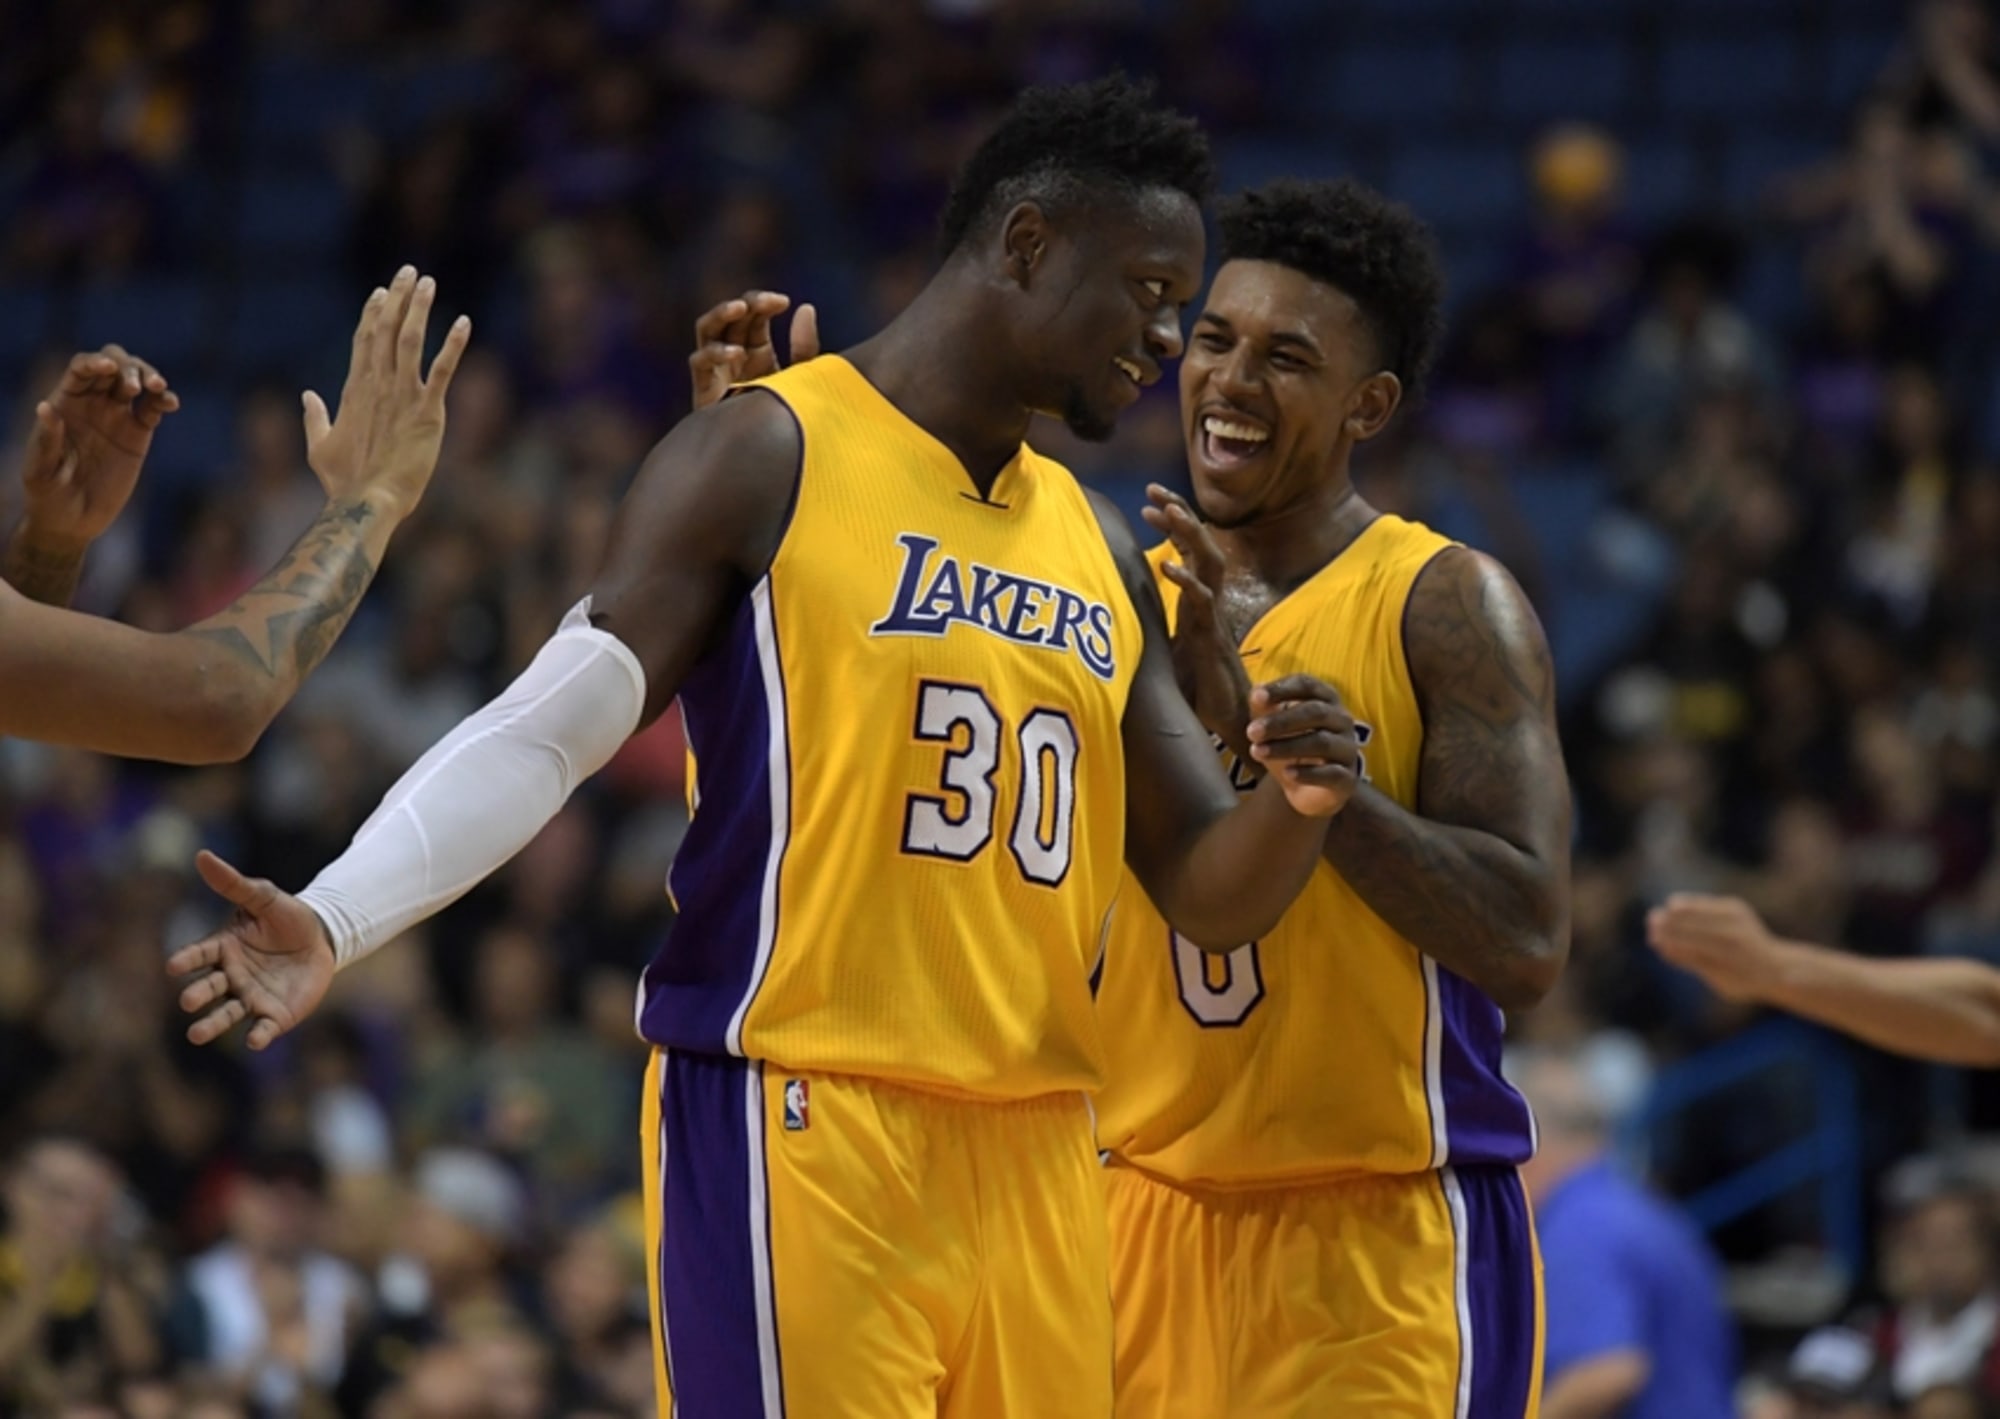 Lakers Season Opener Five Things To Watch For In LA's first game